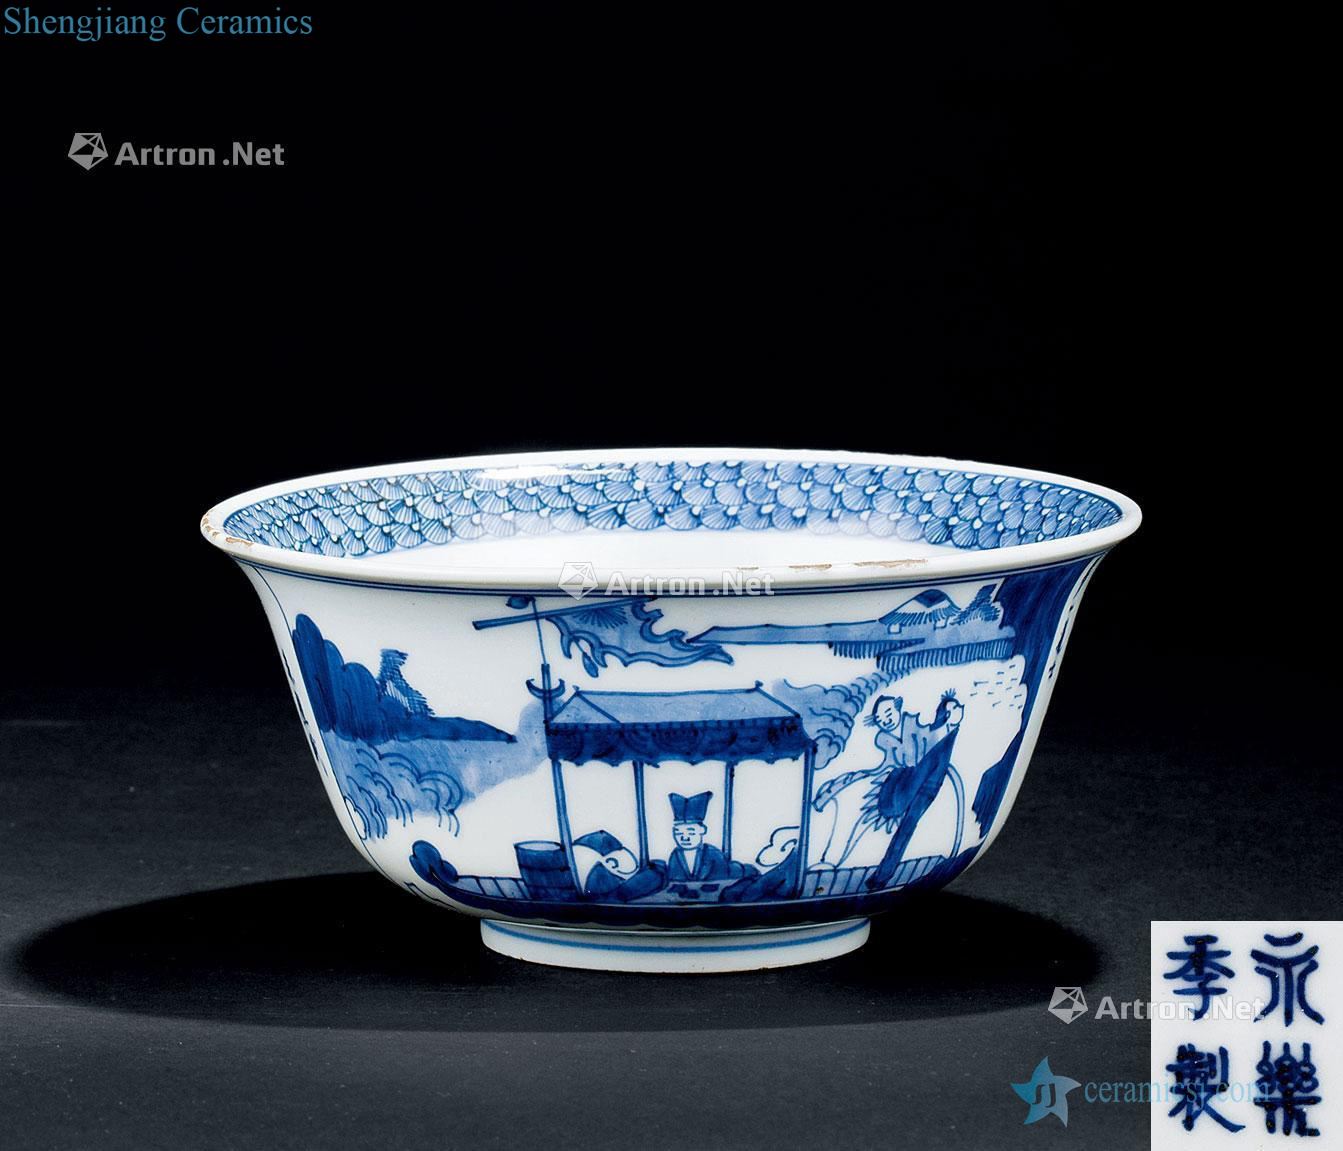 In the qing dynasty (1644-1911) blue and white literary green-splashed bowls